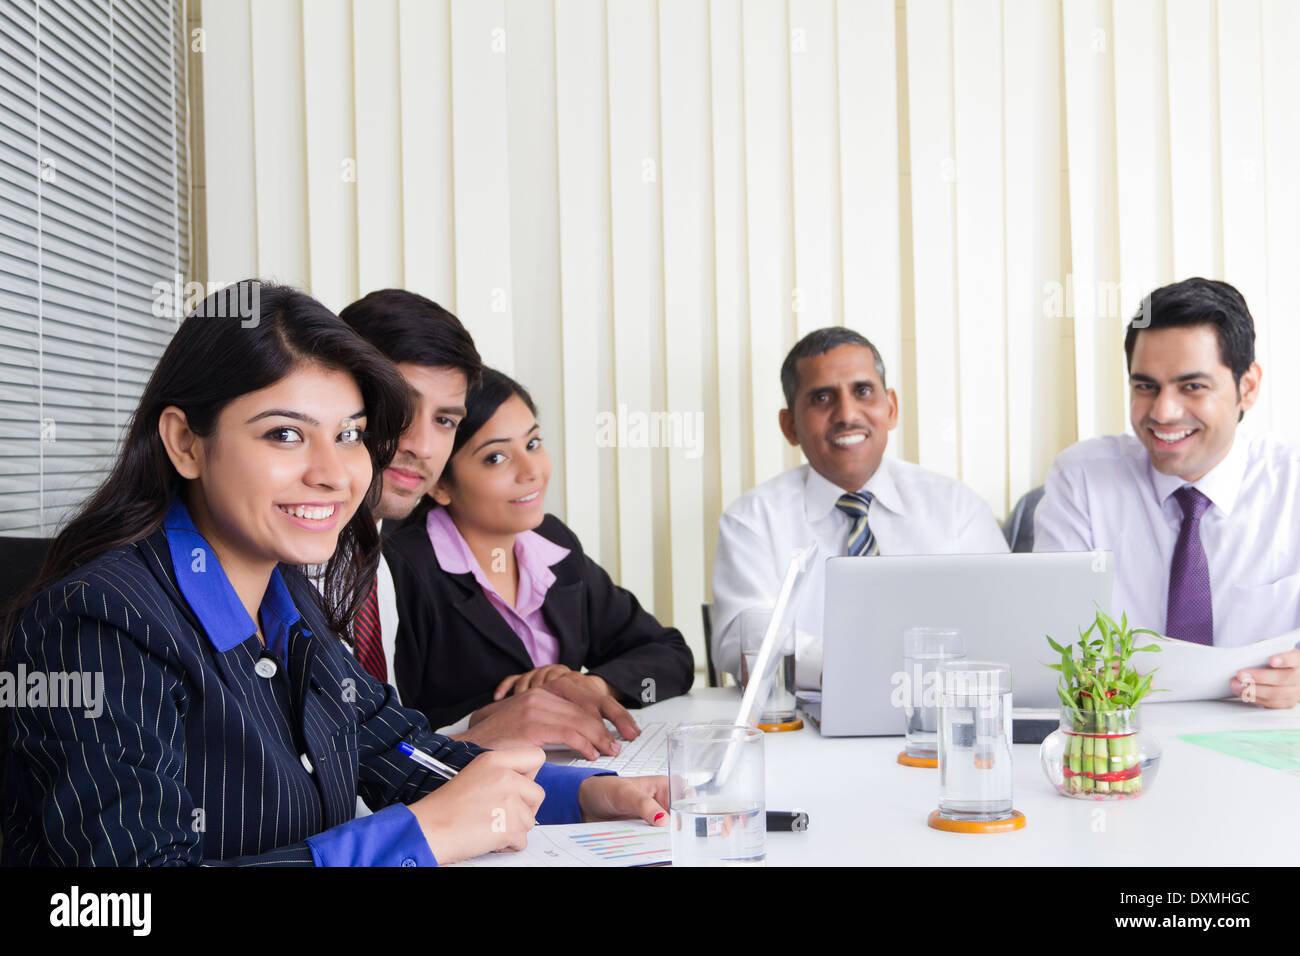 Indian Business People Meeting in Office Stock Photo - Alamy